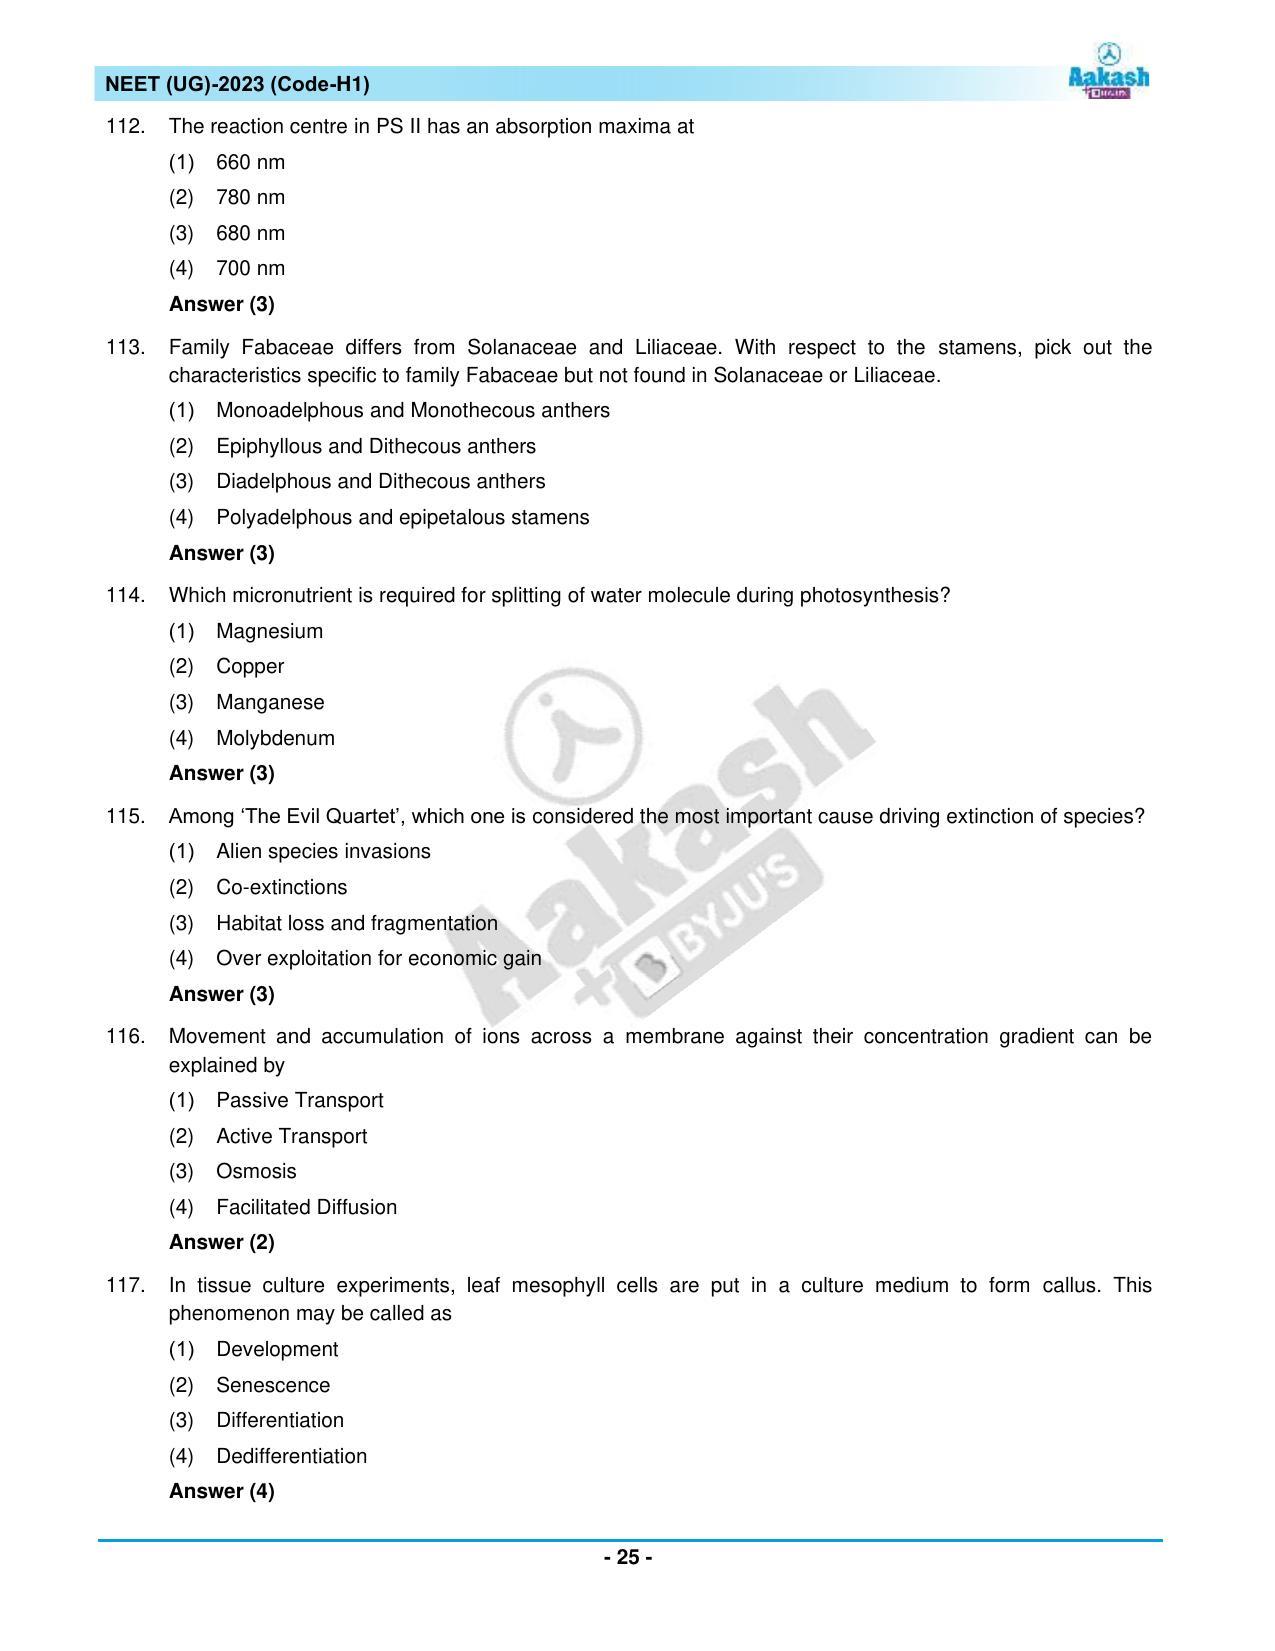 NEET 2023 Question Paper H1 - Page 25